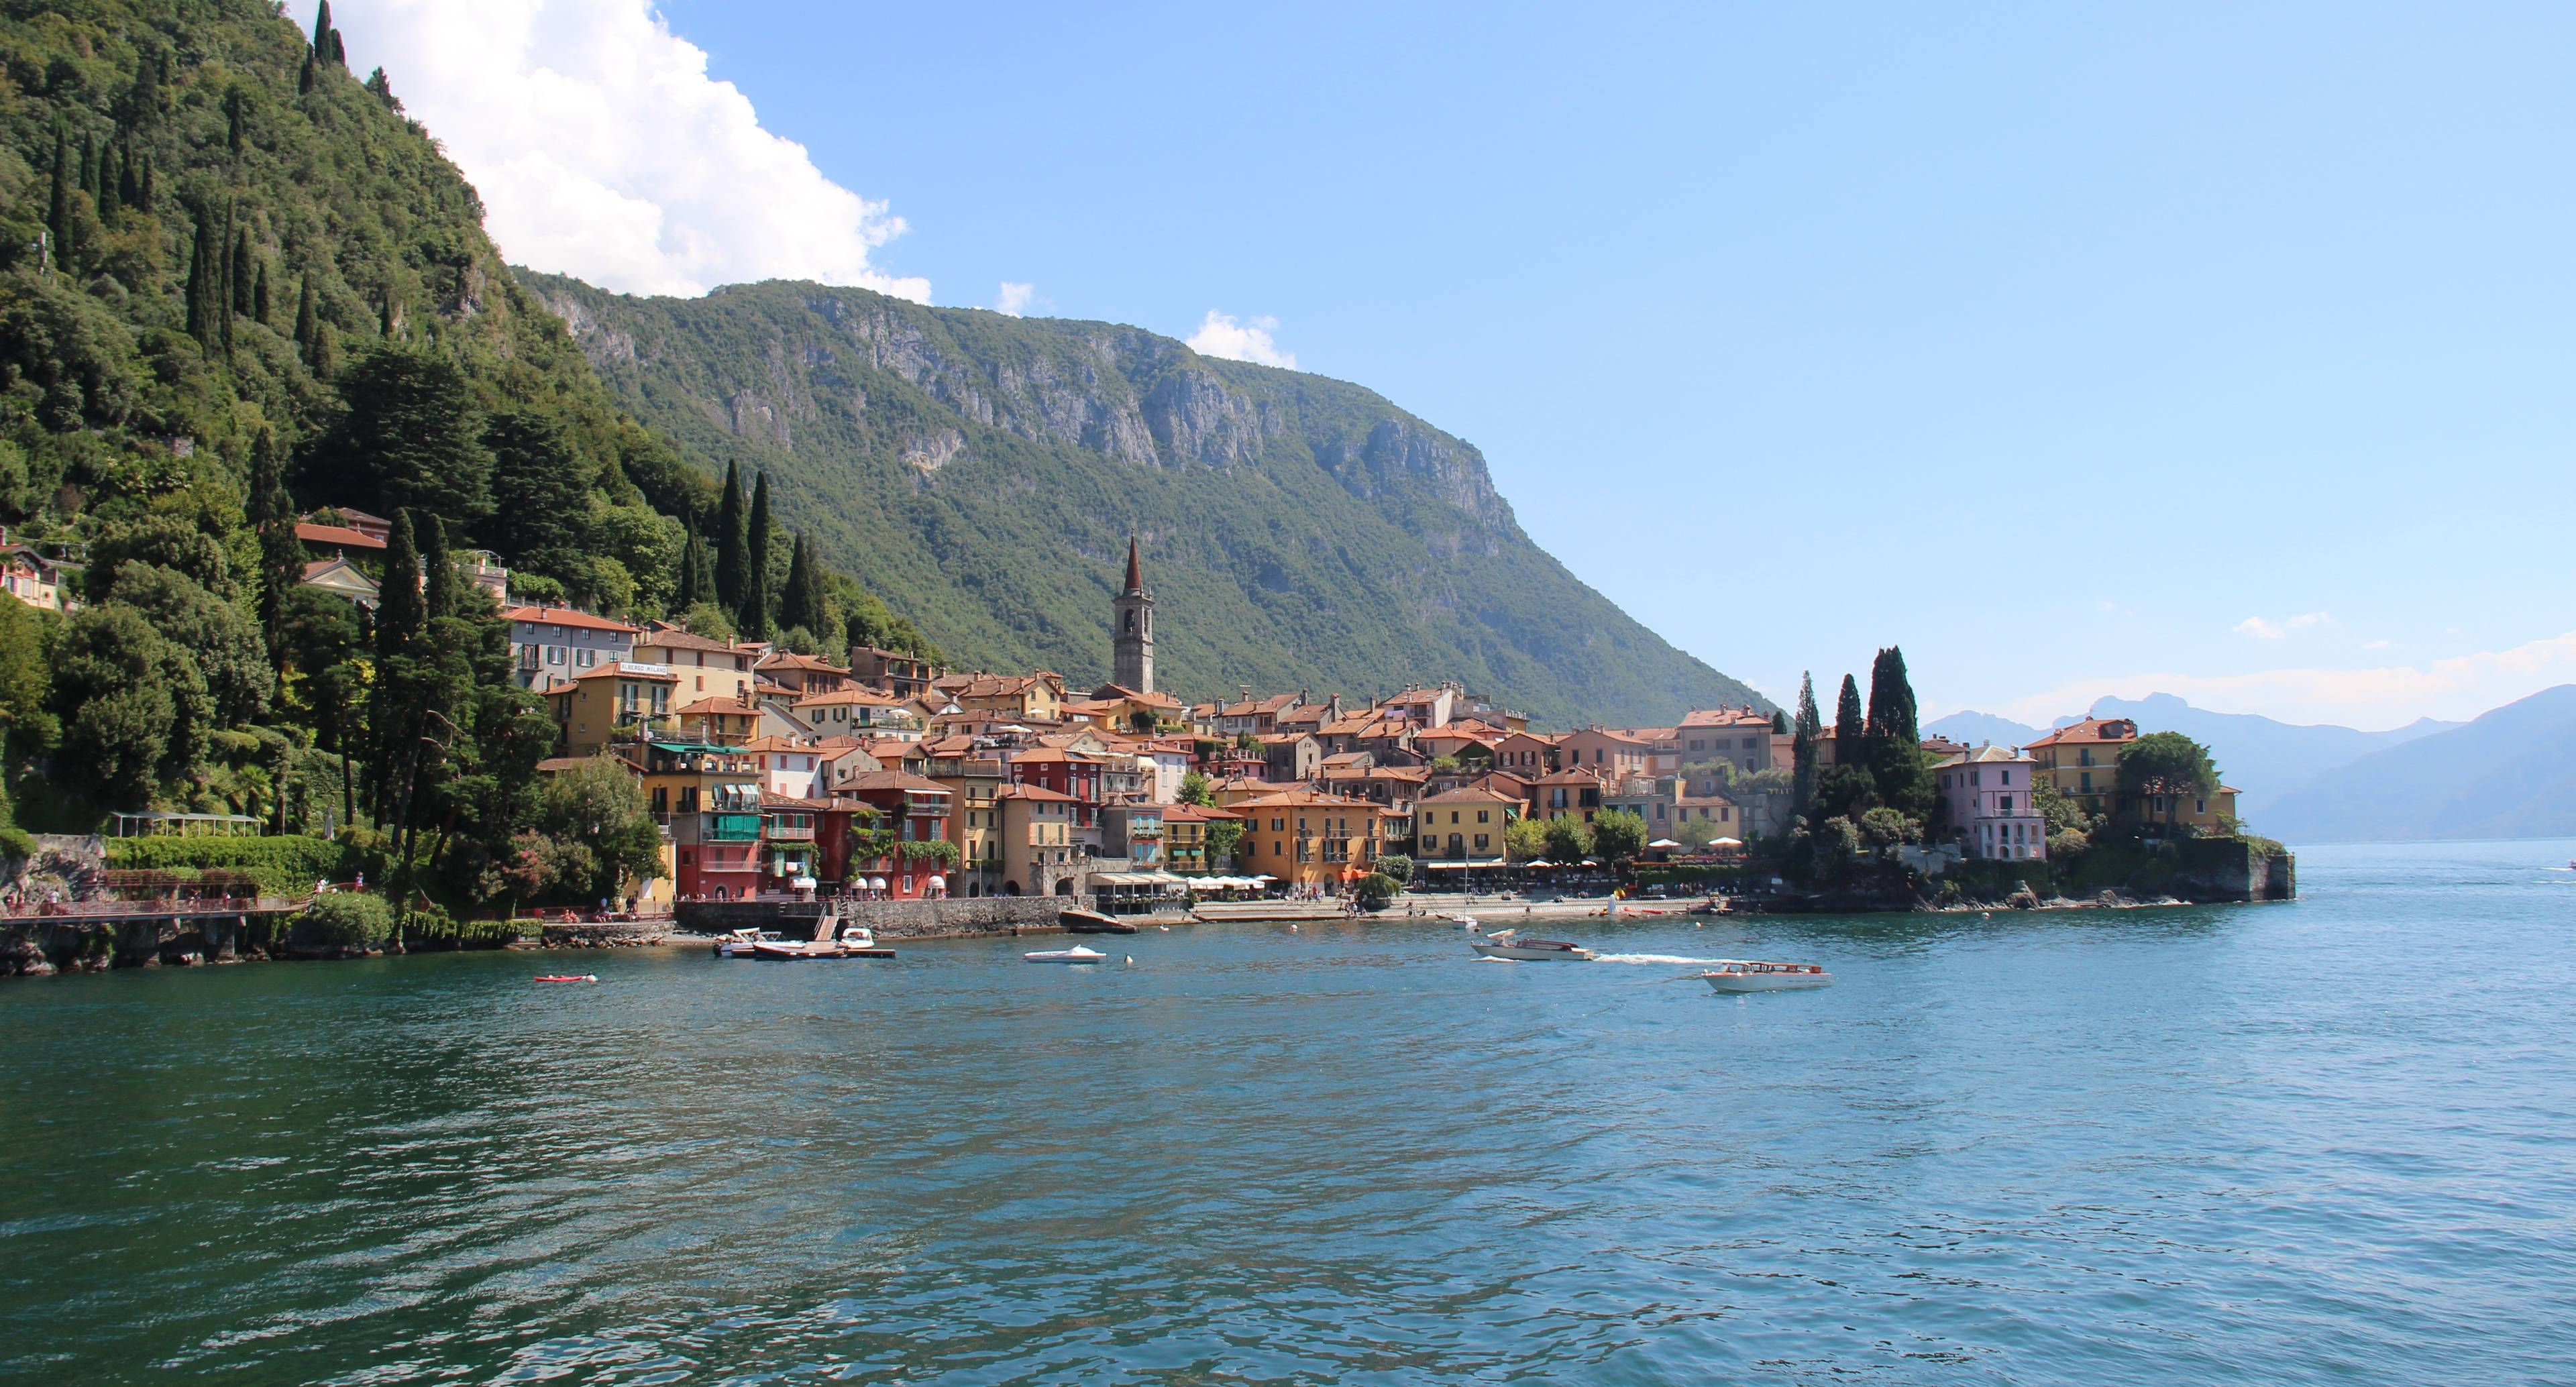 From Varenna to Lecco